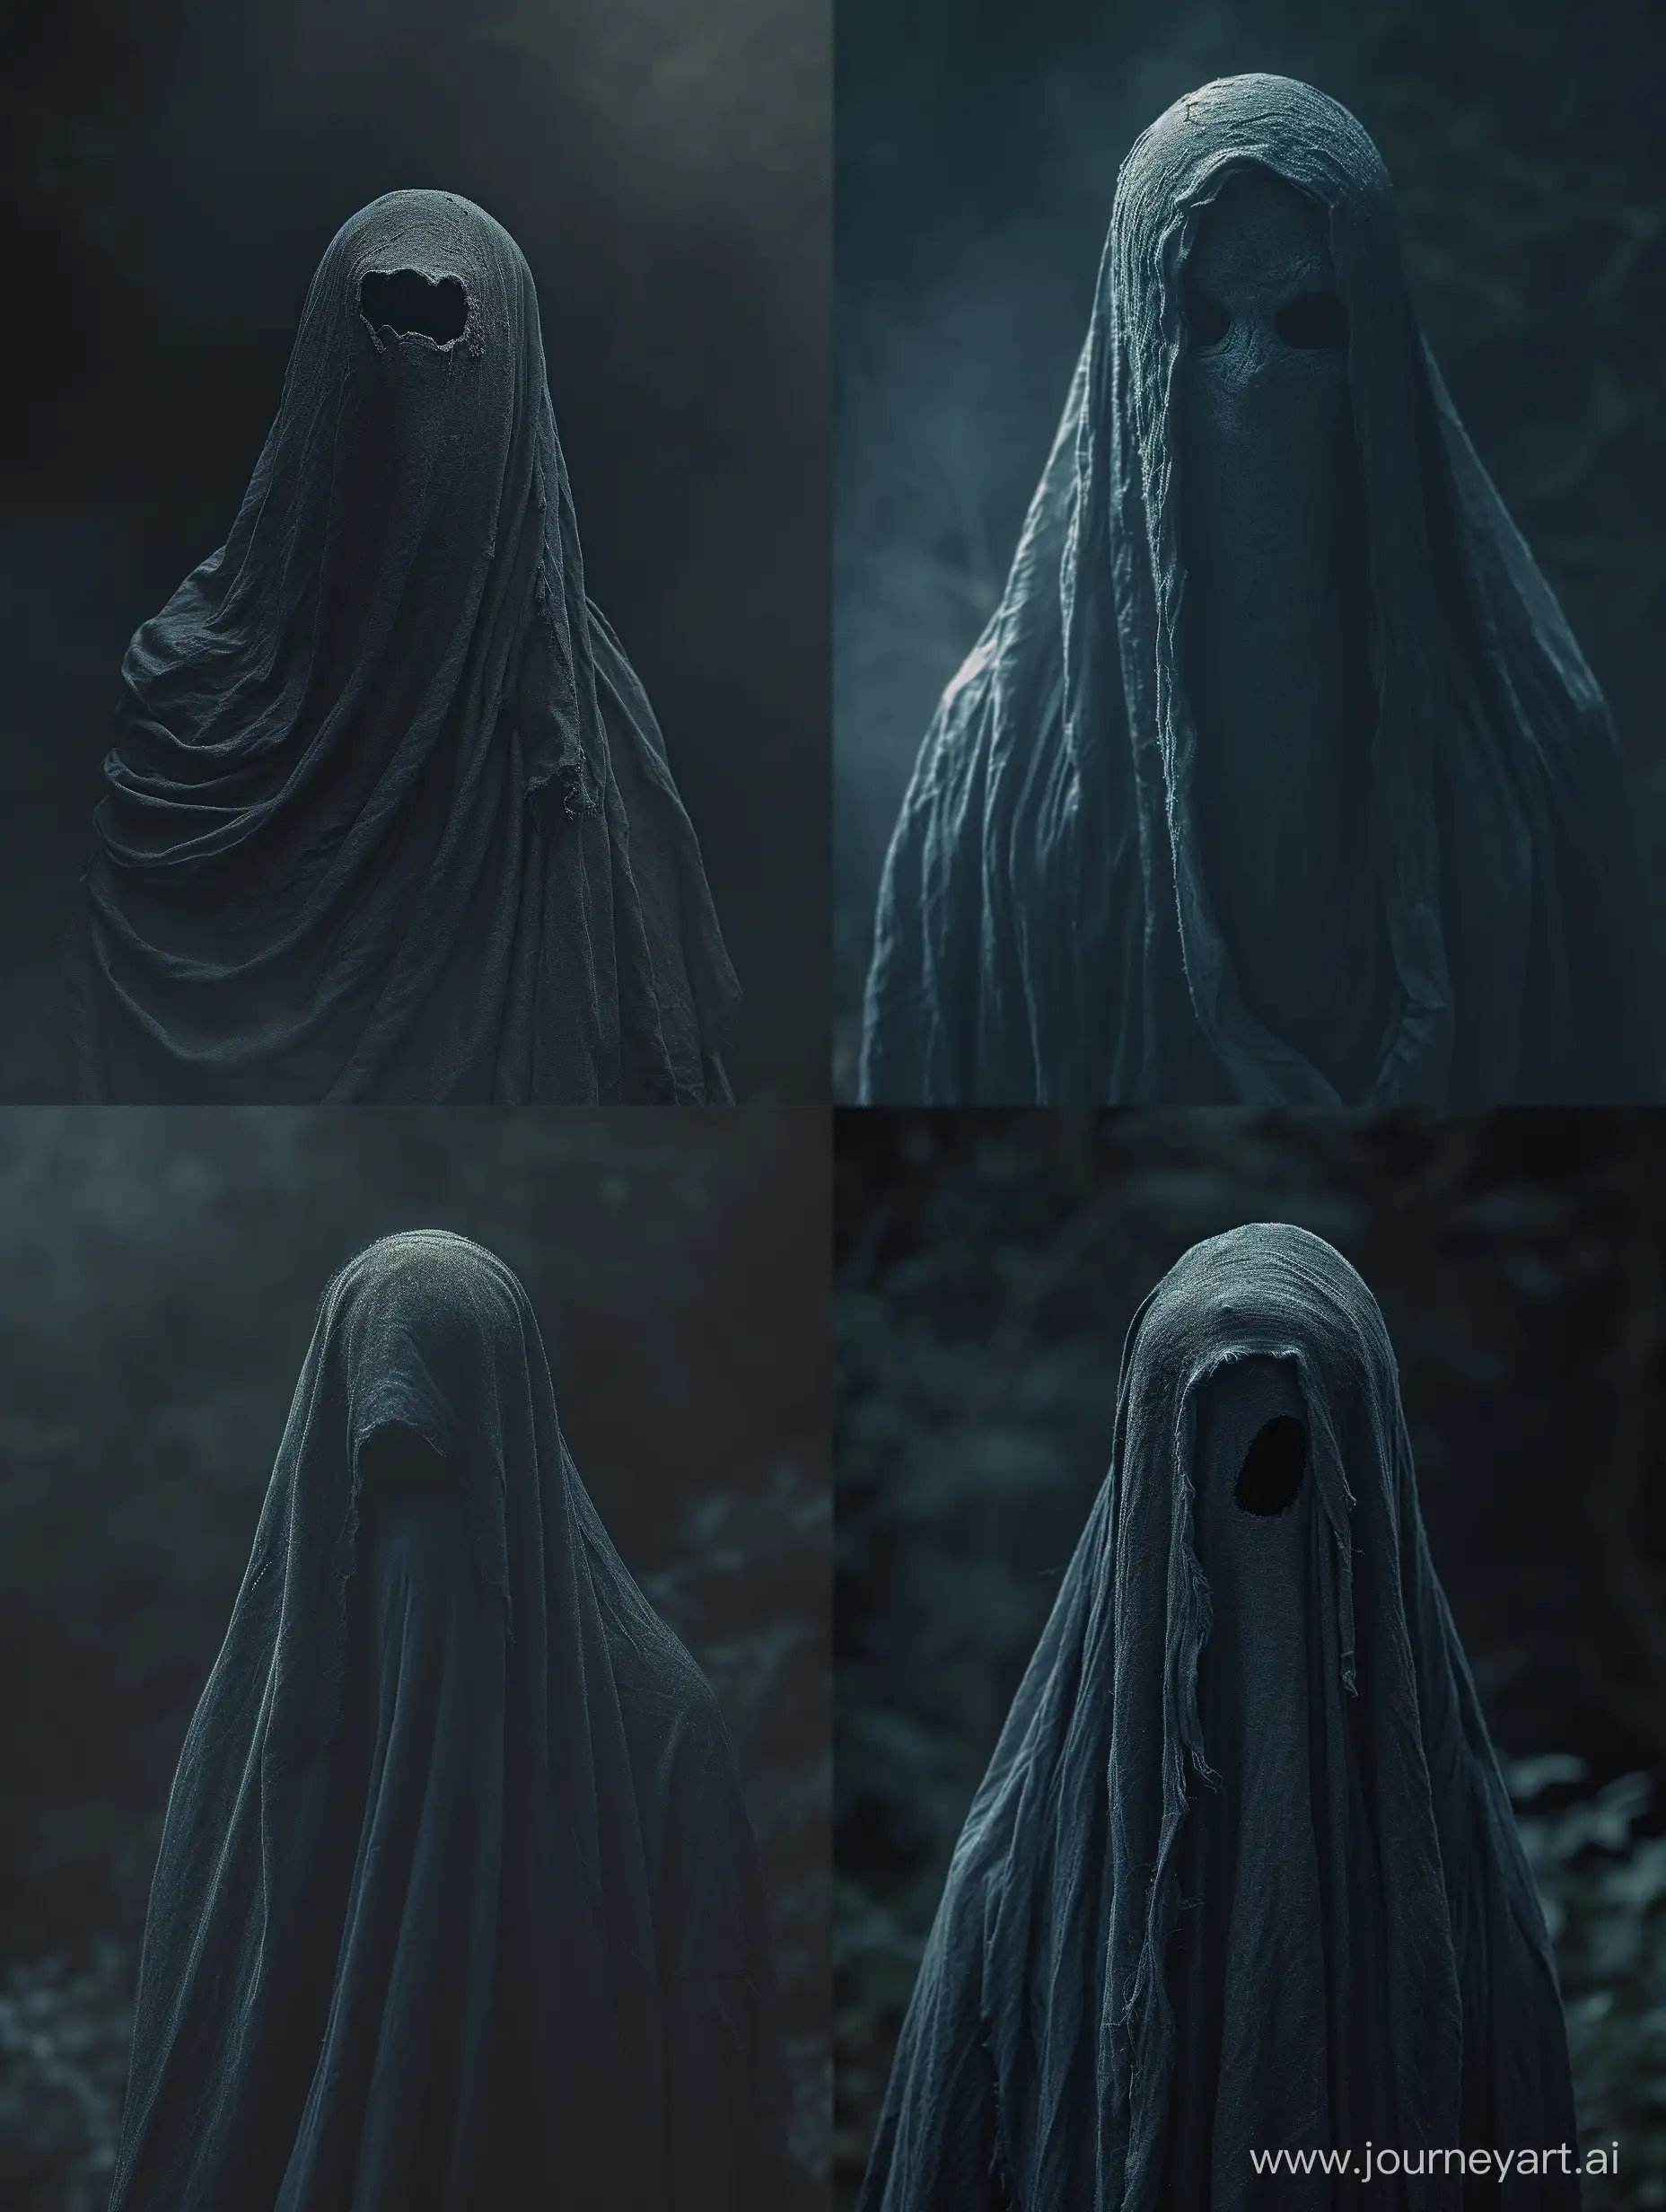 /imagine prompt: A haunting photograph of a ghost, covered with a dark cloak that leaves its mouth uncovered, looking straight ahead, captured in 4K resolution. The atmosphere is eerie and supernatural, with the ghostly figure captured in a close-up, showing intricate details in the cloak and the ghost's face. The colors are pale and ethereal, with a high contrast that adds to the ghostly atmosphere of the photograph. The lighting is low-key, with a single light source casting shadows on the ghost's face and the cloak. The background is dark and blurred, with a shallow depth of field that emphasizes the focus on the ghost and its supernatural appearance. The composition is simple, with the focus on the ghost's ghostly and otherworldly quality. The photograph has a realistic quality that allows for every detail to be seen clearly, making it feel like a real portrayal of a ghost. The ghost is shown in a frontal view, with its face partially covered by the cloak and its mouth exposed, giving it a haunting and eerie appearance. It's a perfect fit for those who appreciate the eerie and supernatural quality of realistic photographs. --ar 3:4